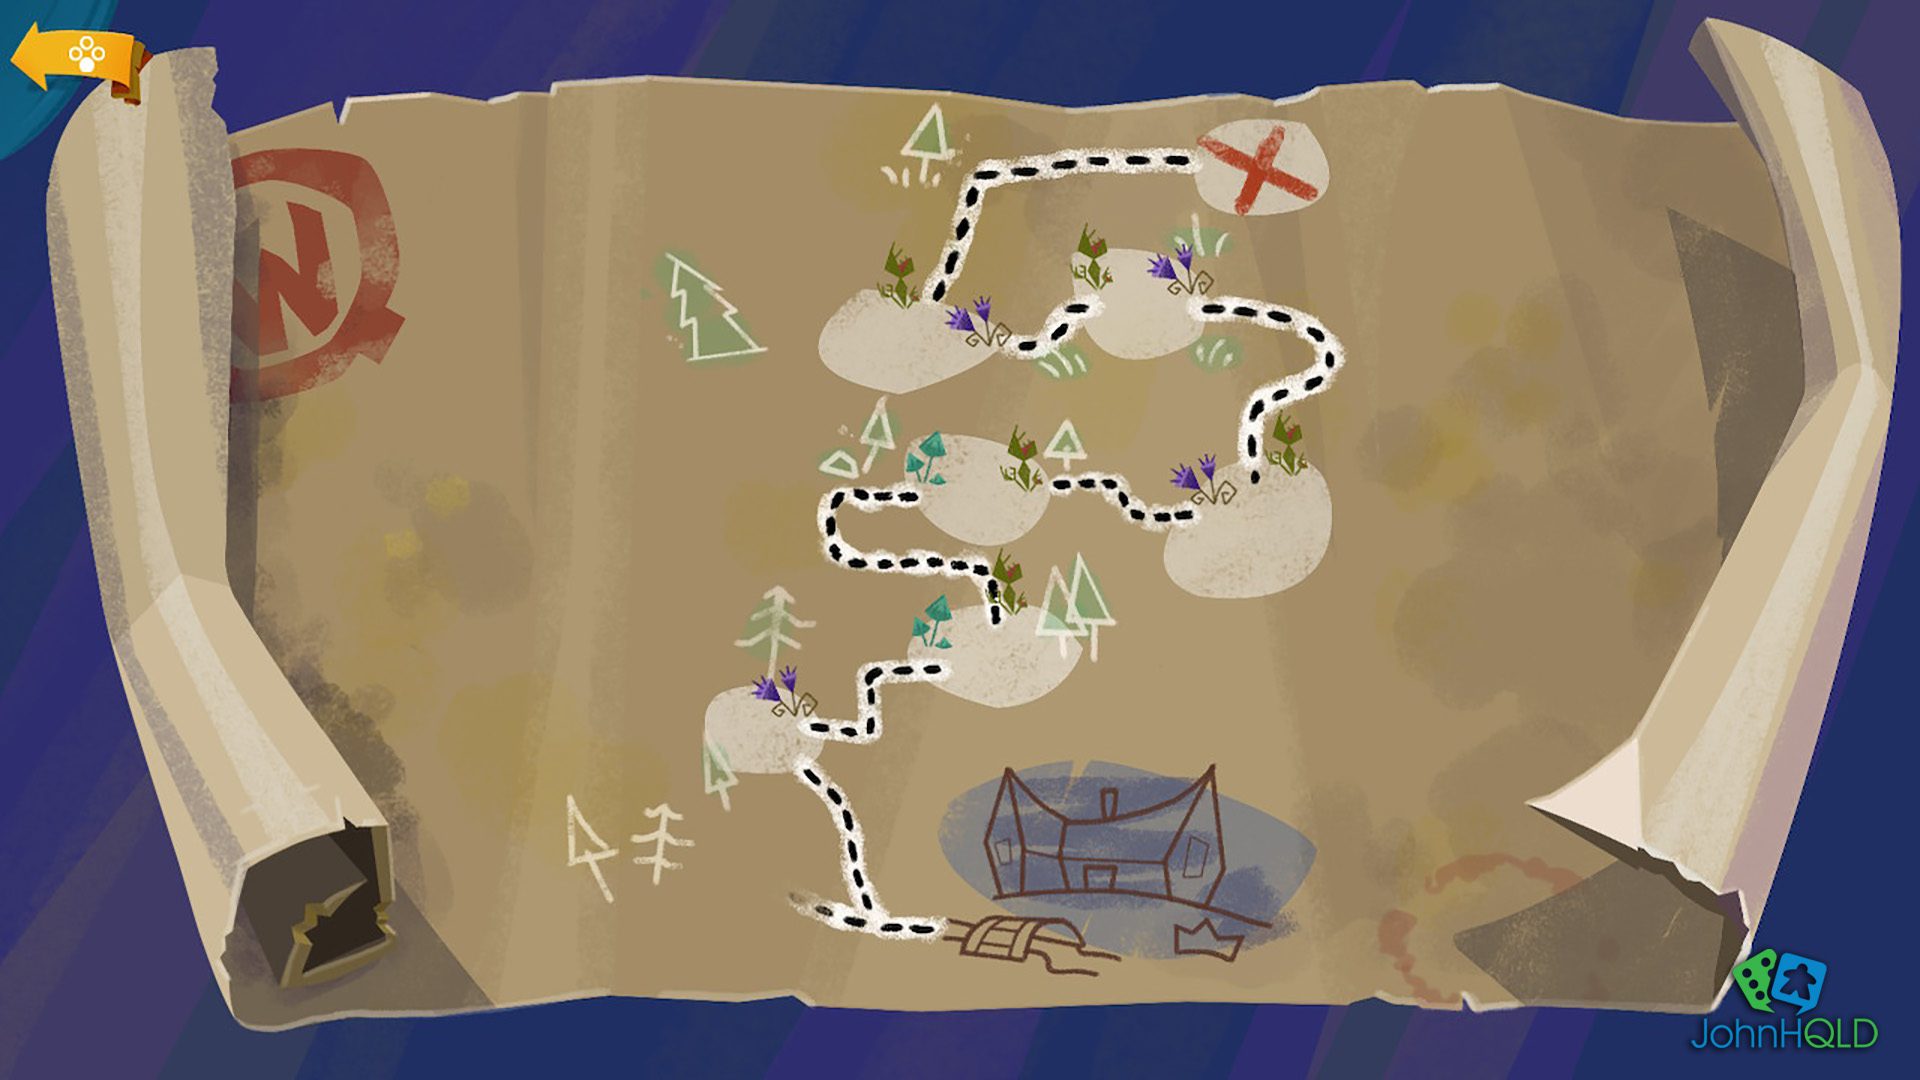 20220926 - Return to Monkey Island - Finding the map may be different on casual